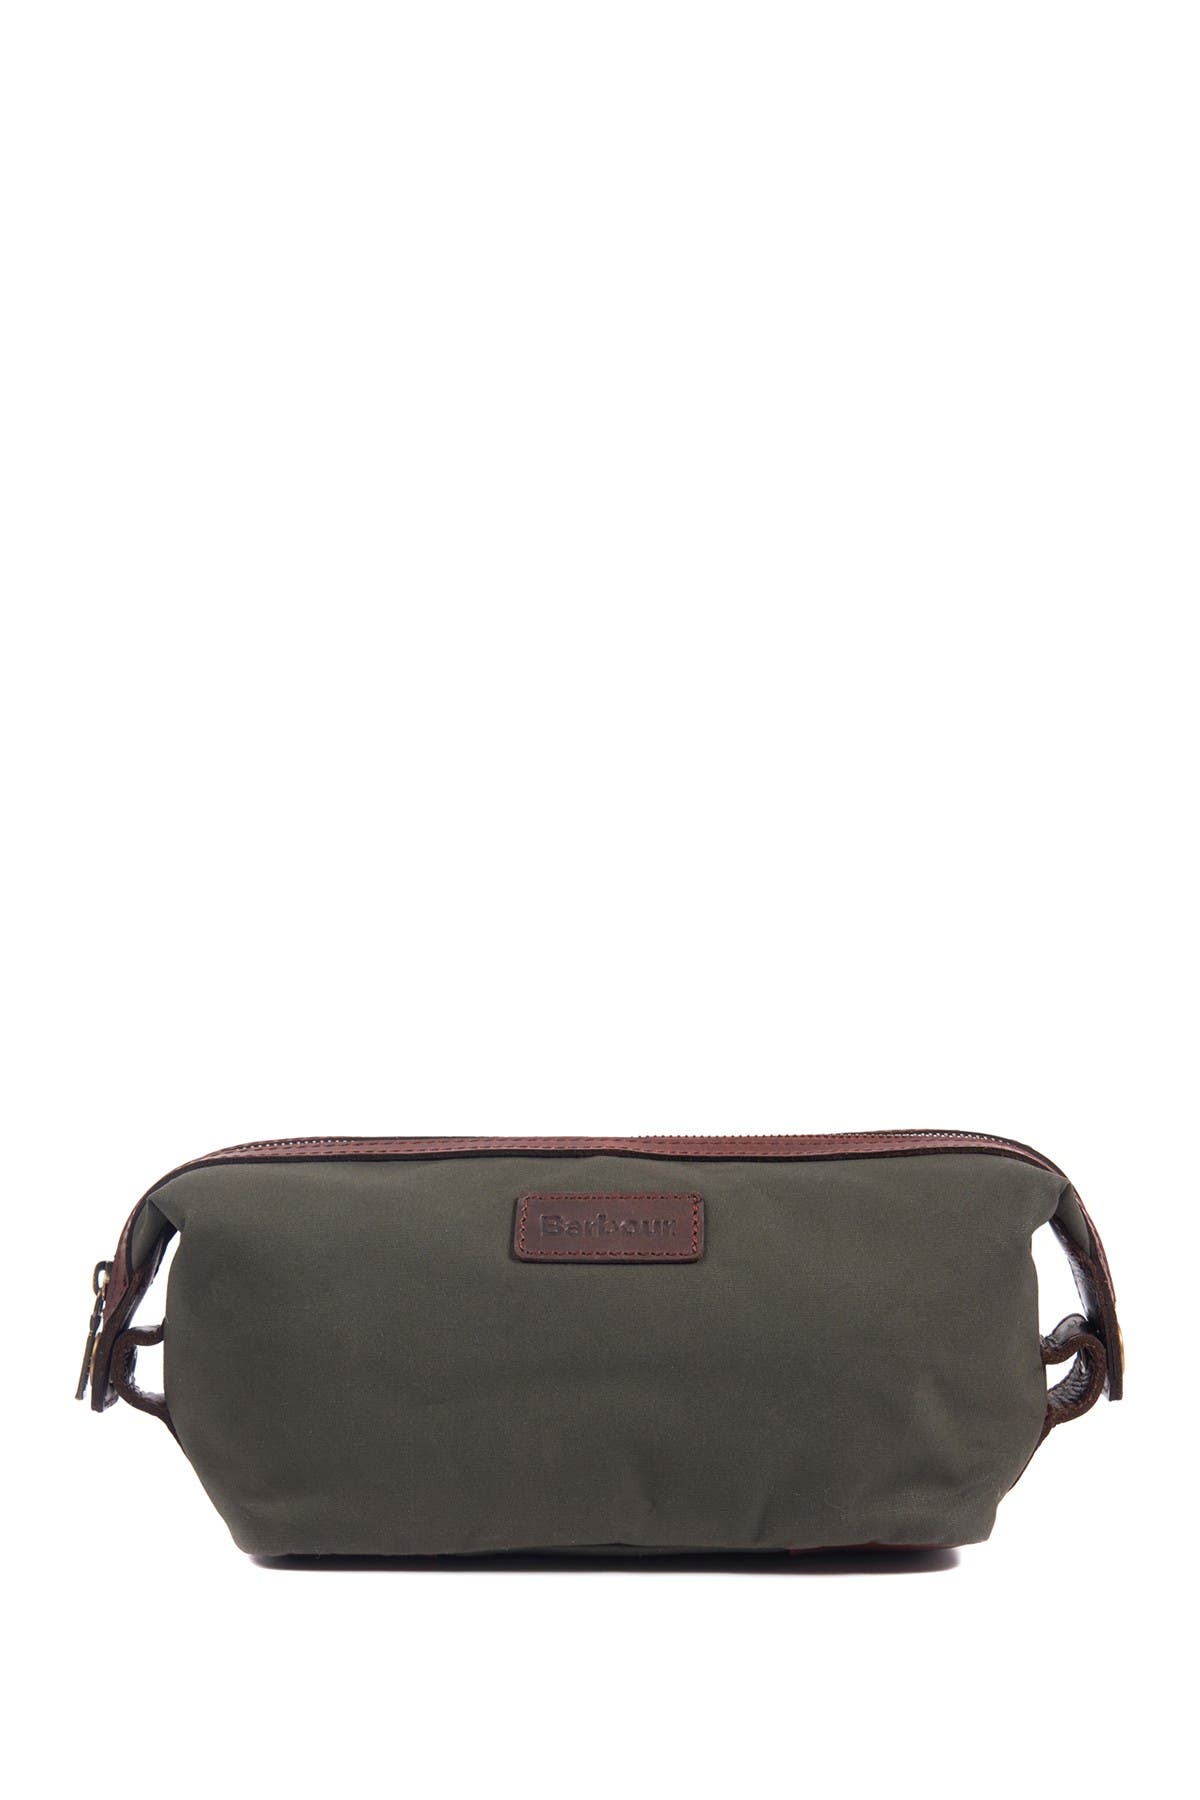 barbour dry wax wash bag